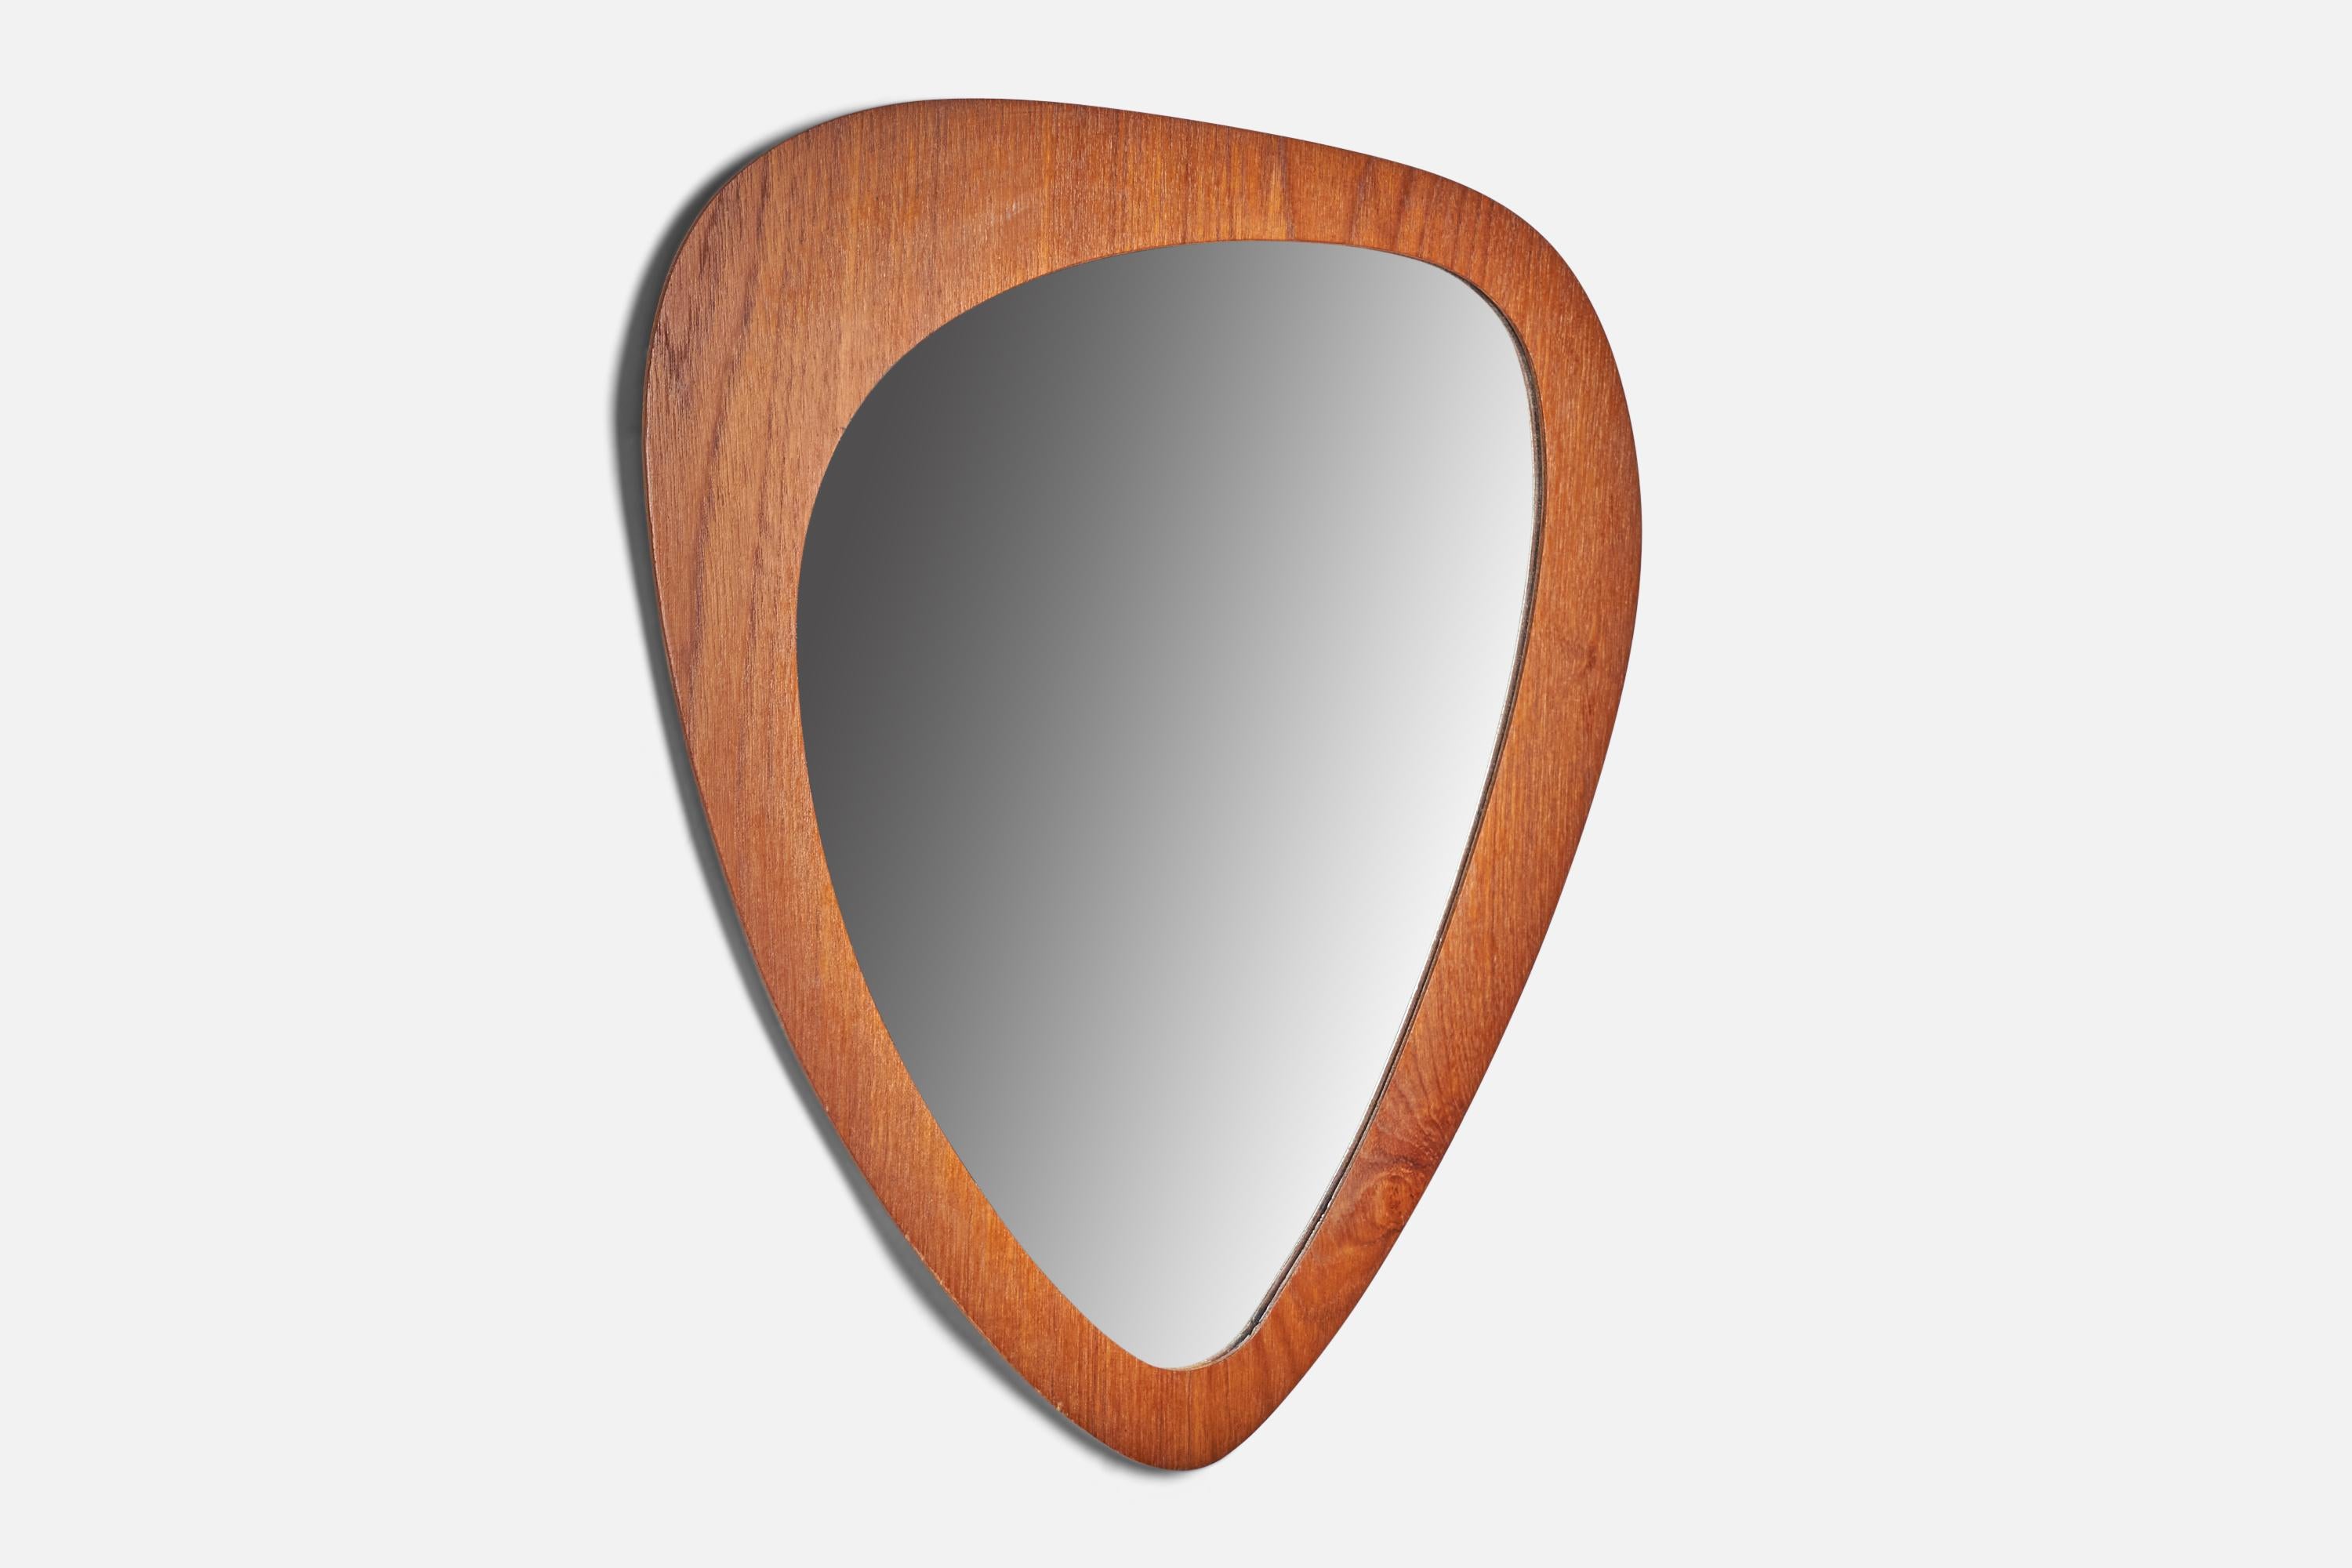 A thin teak veneer freeform wall mirror designed and produced in Sweden, 1950s.